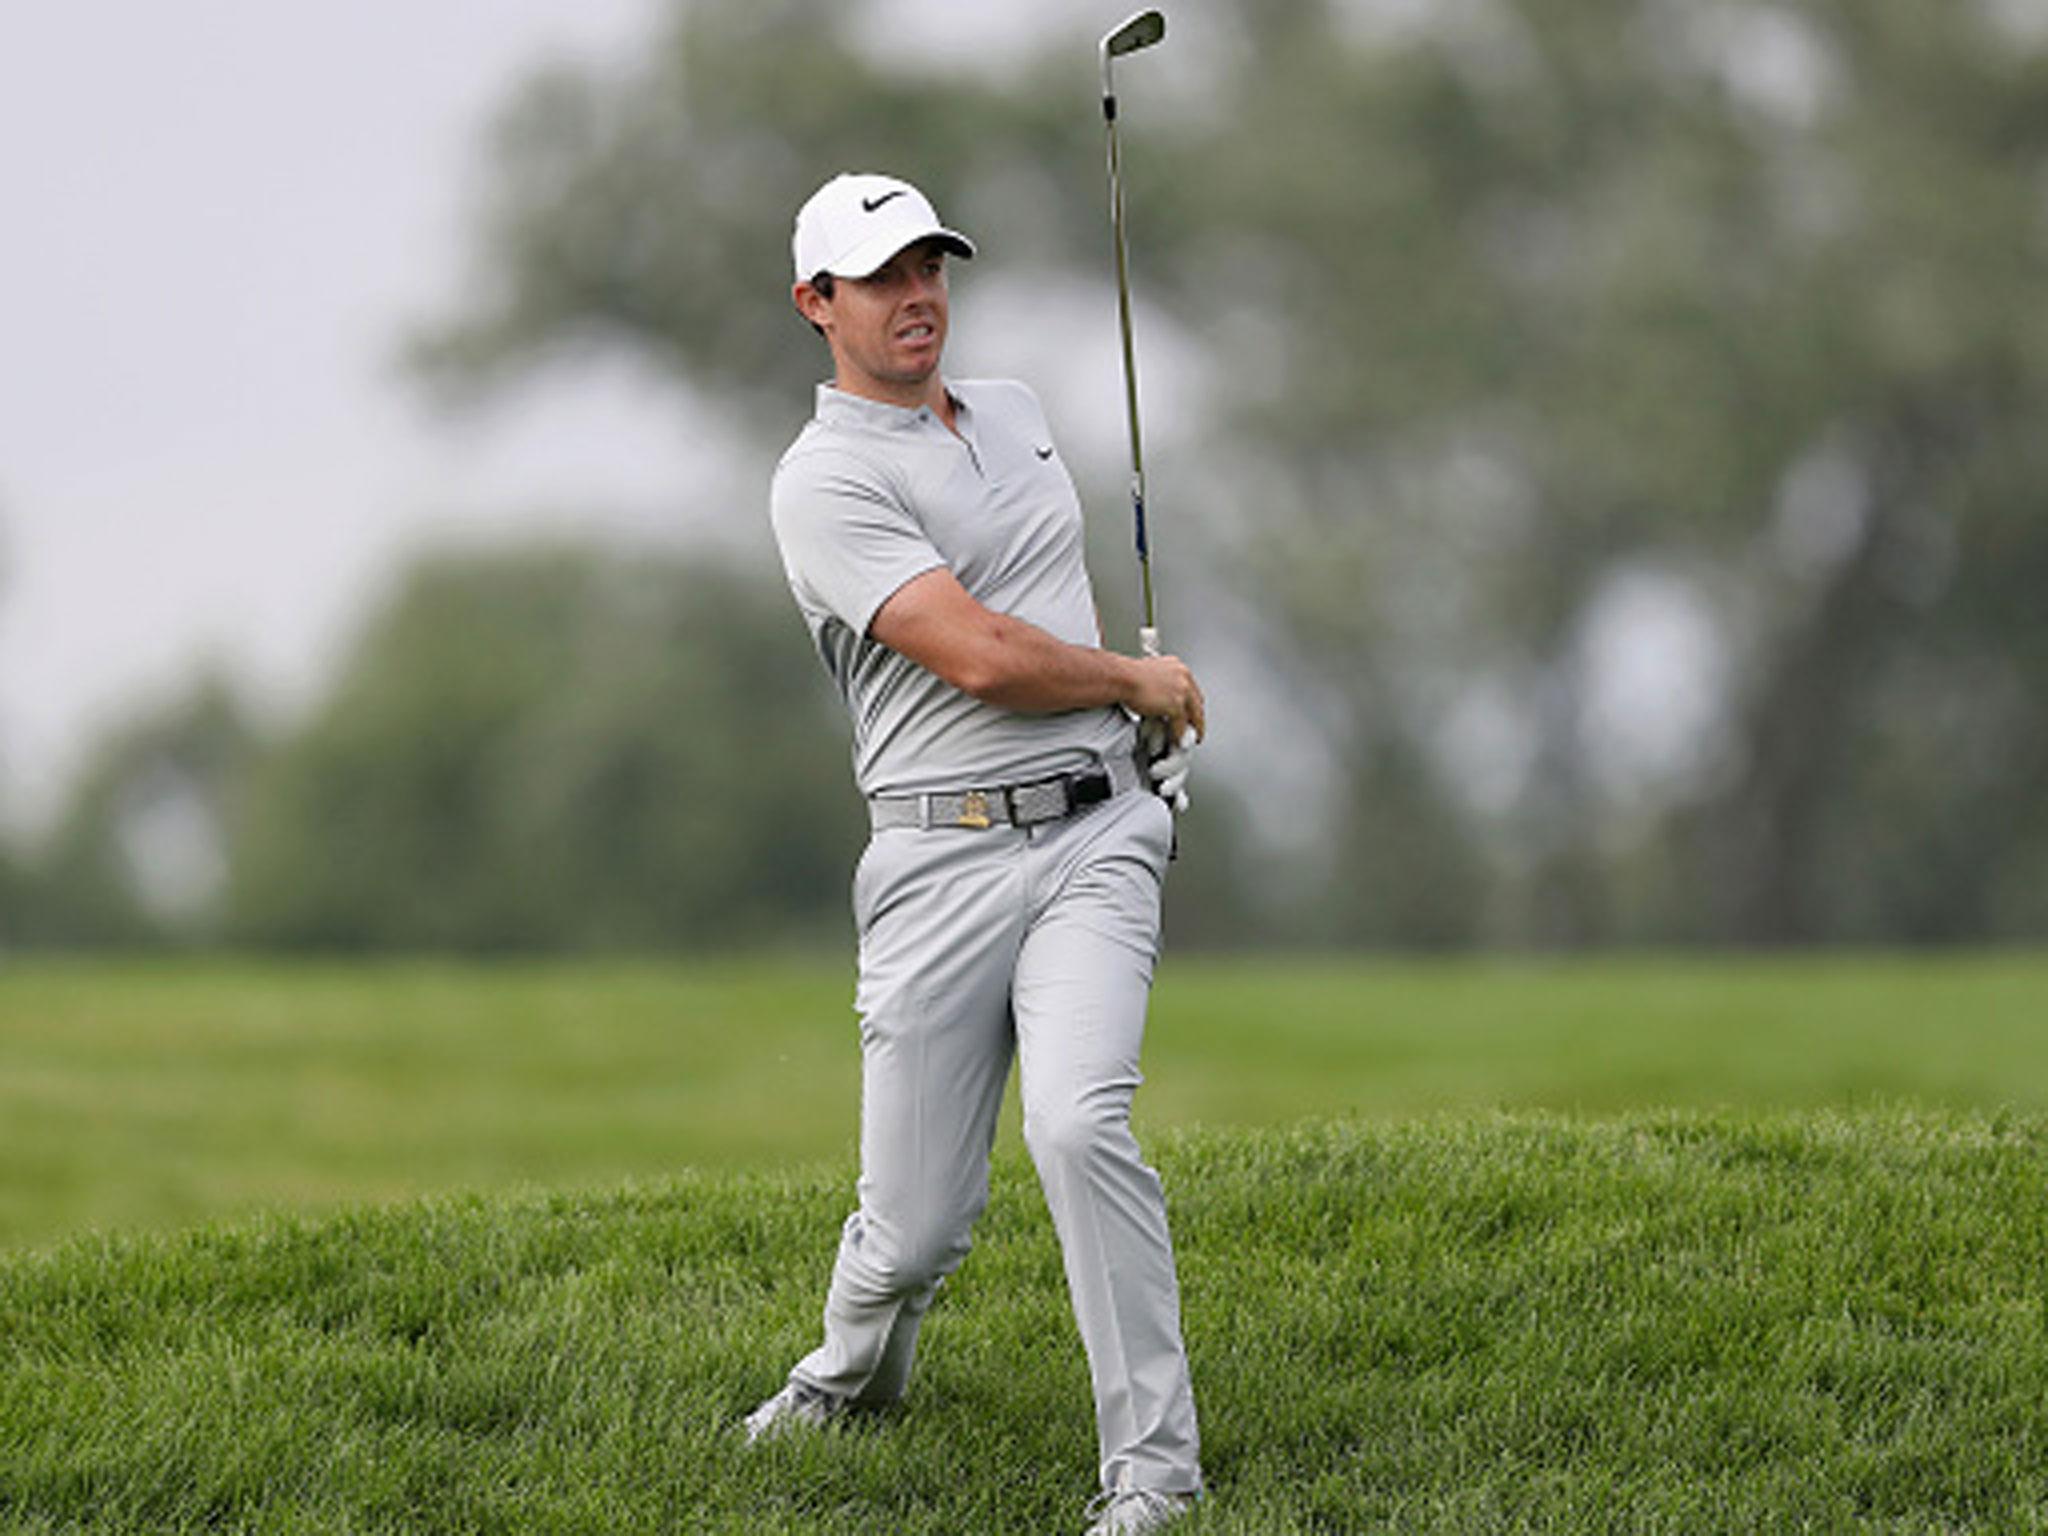 Rory McIlroy had a shocker at Oakmont in his opening round (Getty)